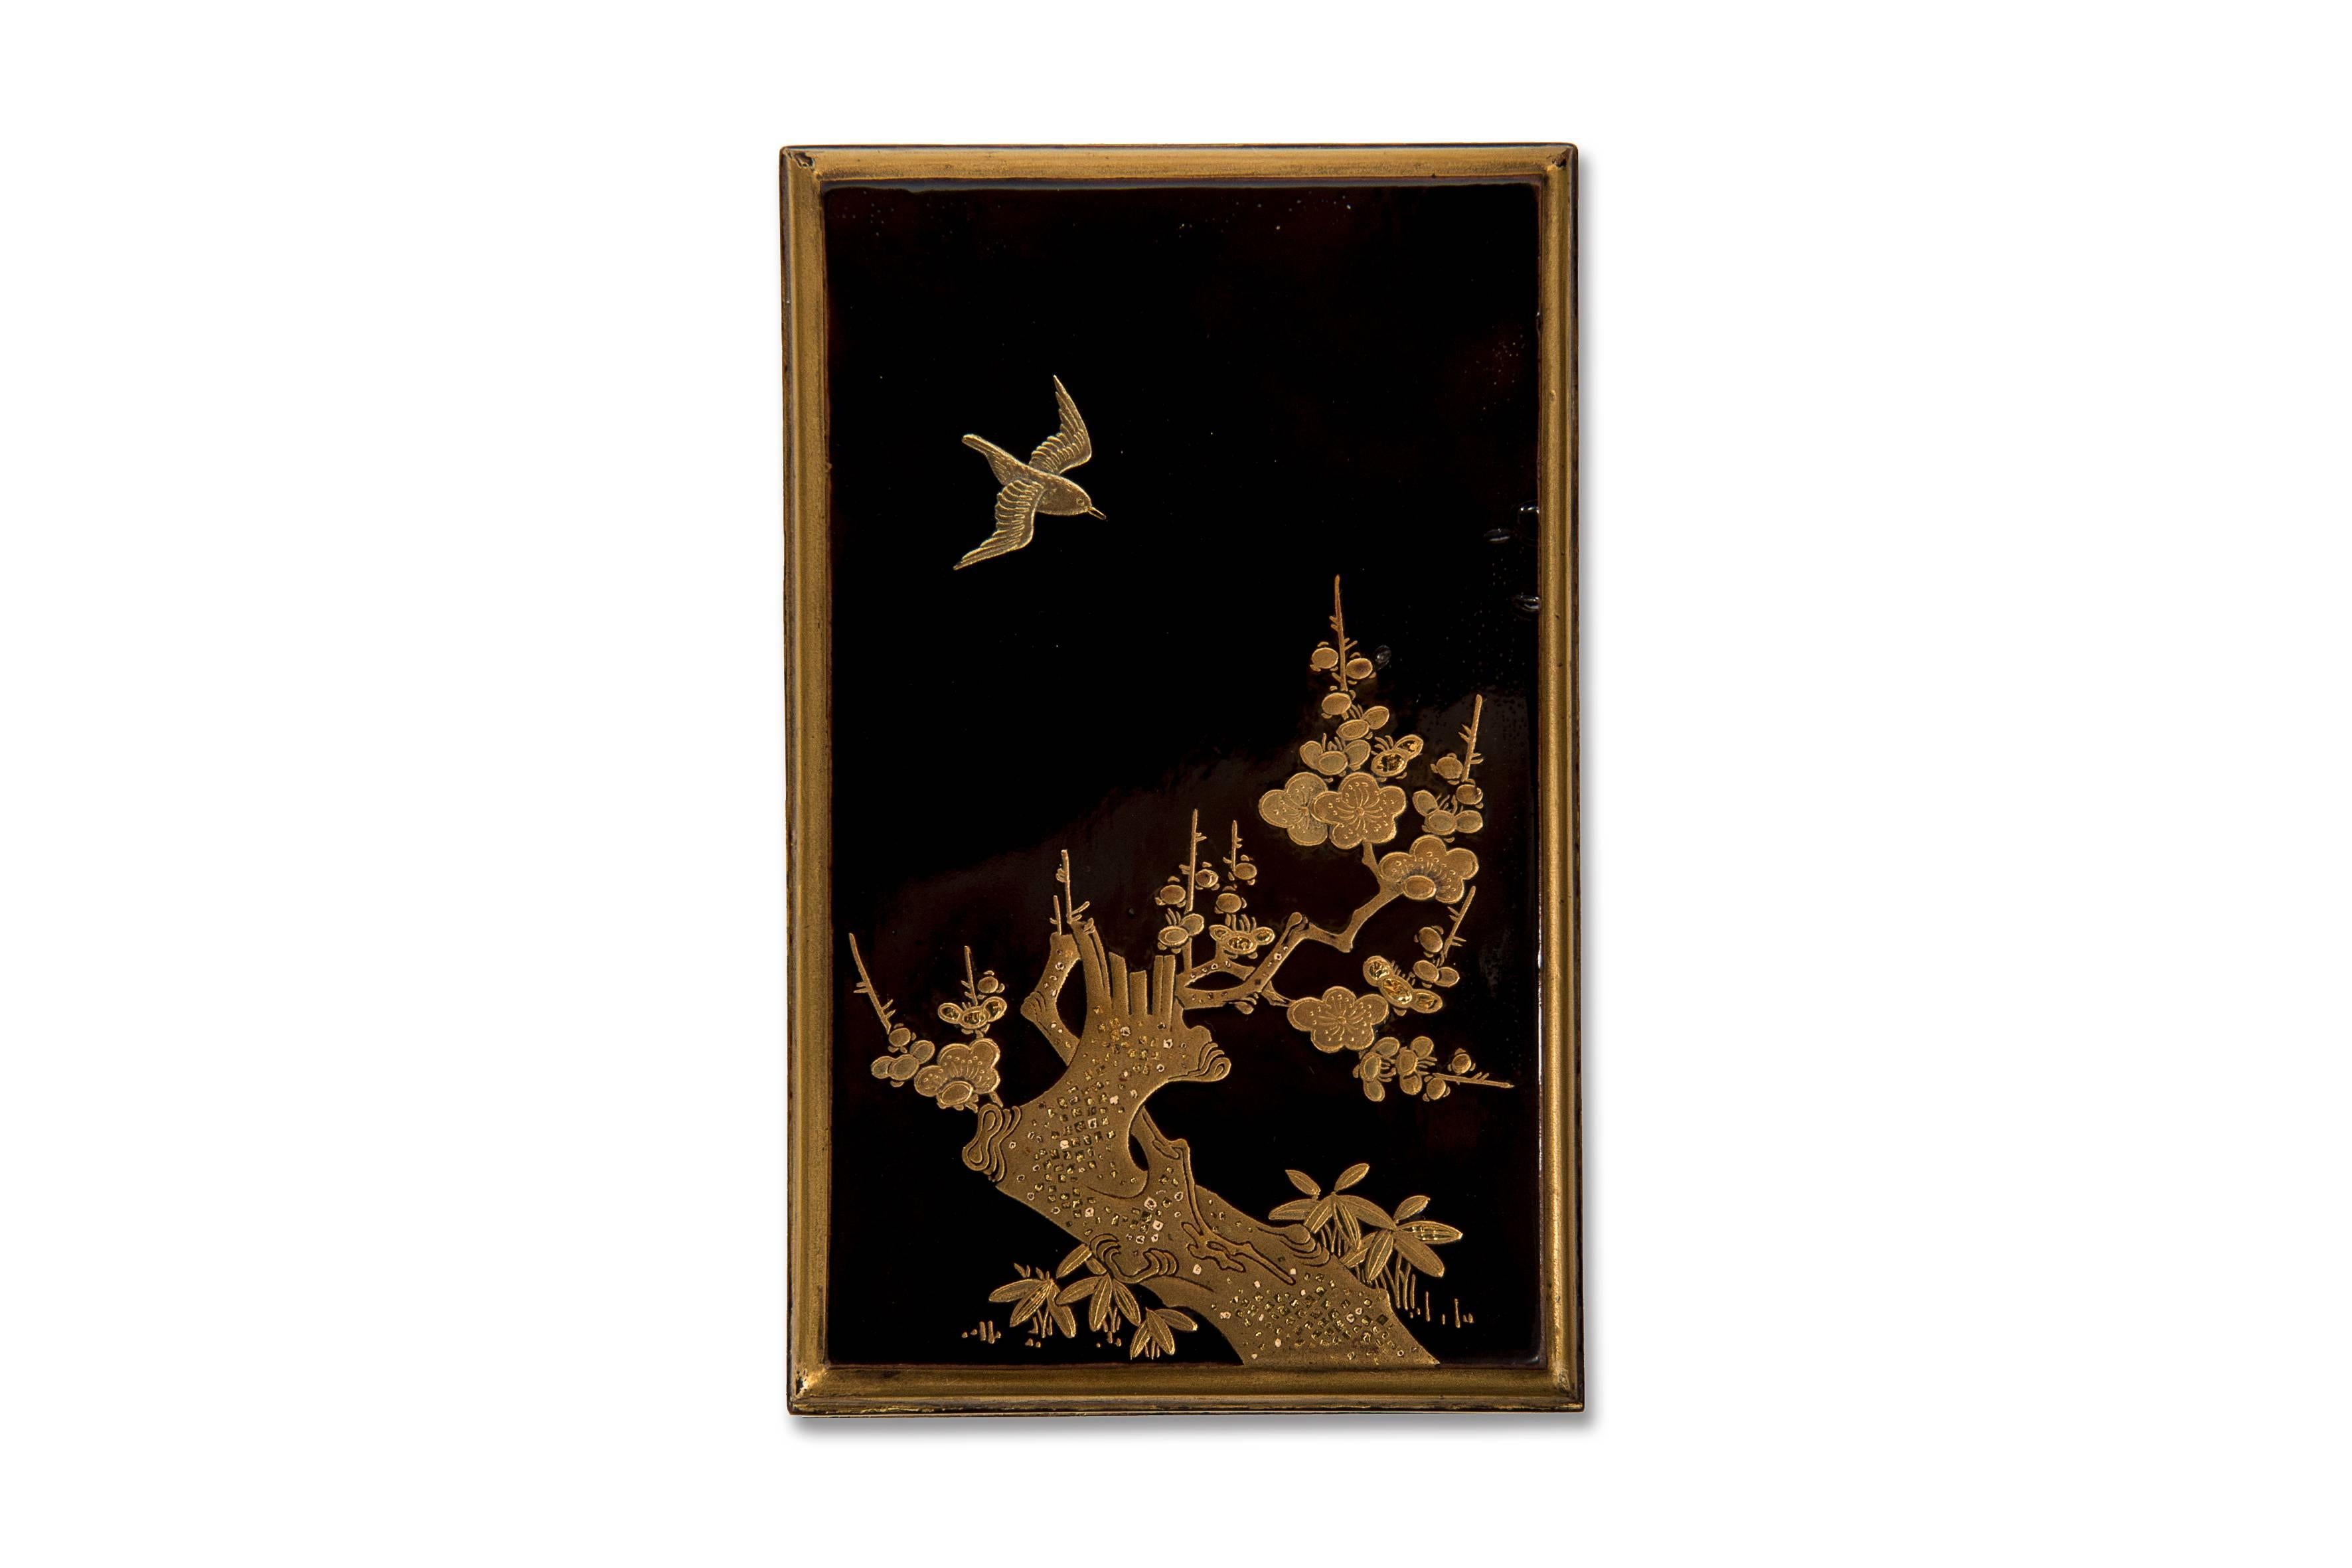 Very small suzuribako in black lacquer with hira maki-e gold lacquer decor of a flowering branch of prunus overflown by a bird. The sides decorated with flowering branches.
The nashi-ji lacquer interior contains a tray with a suzuri (ink stone) and